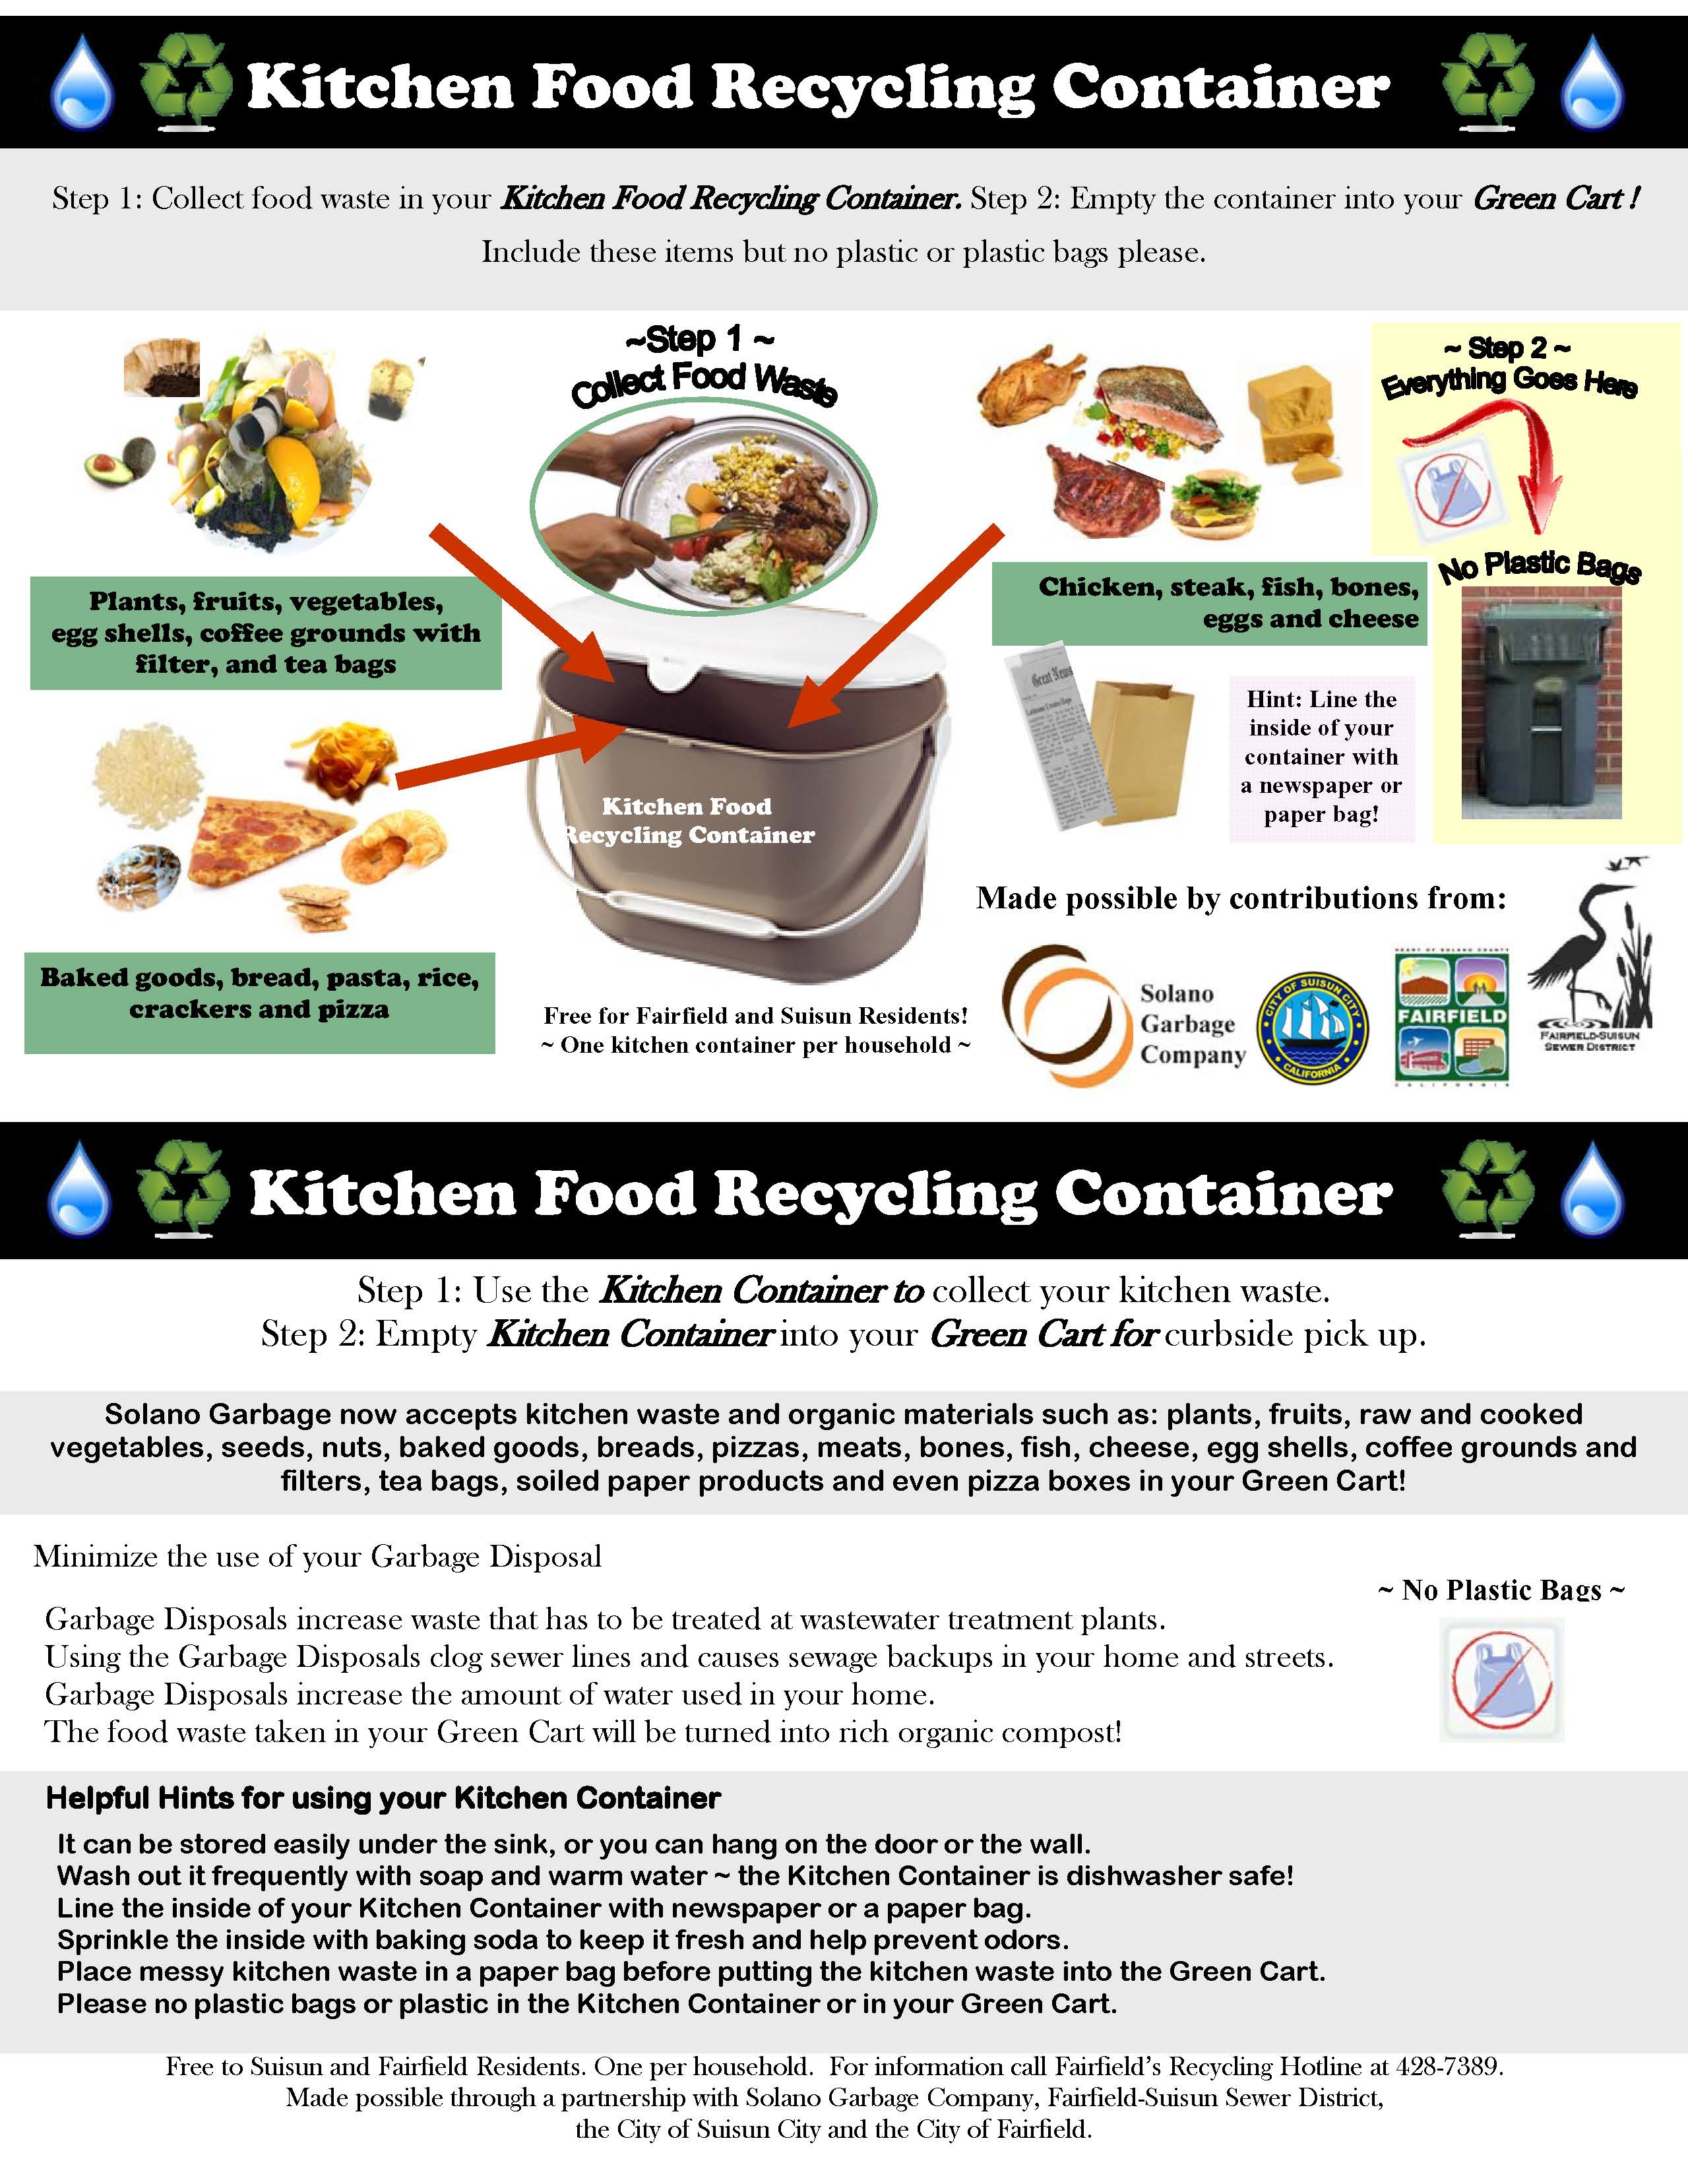 How to dispose of food containers, waste, accessories from summer